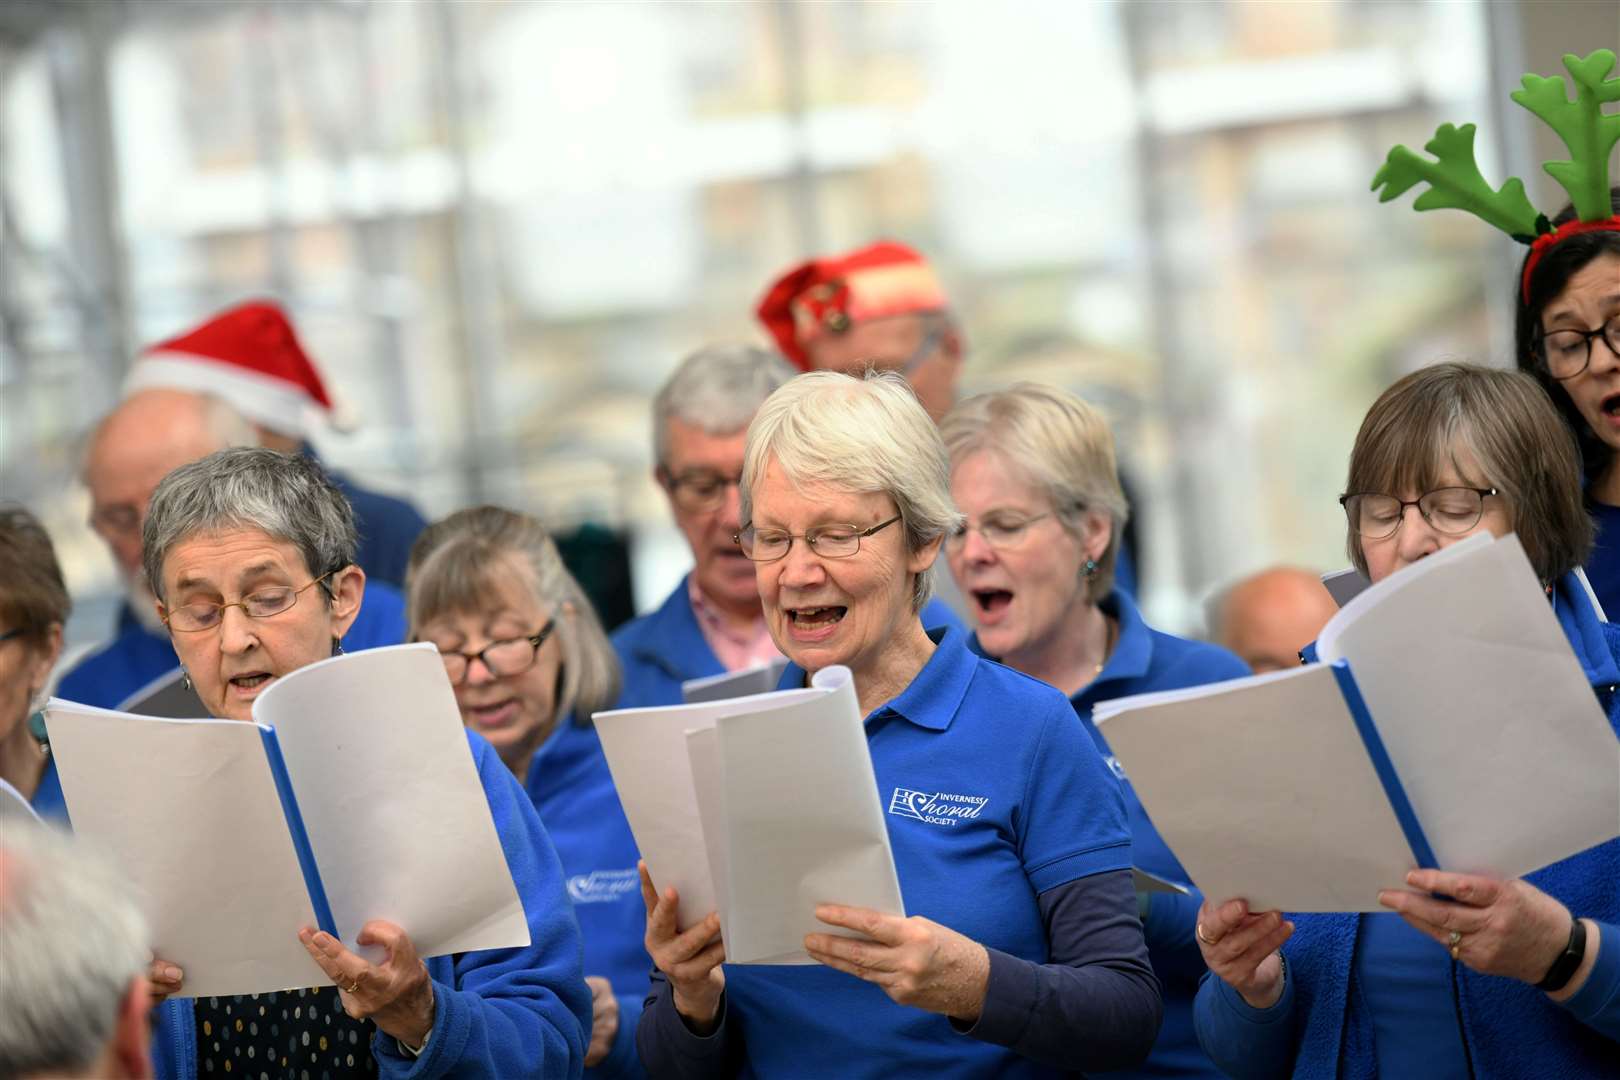 The Inverness Choral Society staged its annual fundraising Carolthon at the Eastgate Shopping Centre in Inverness.